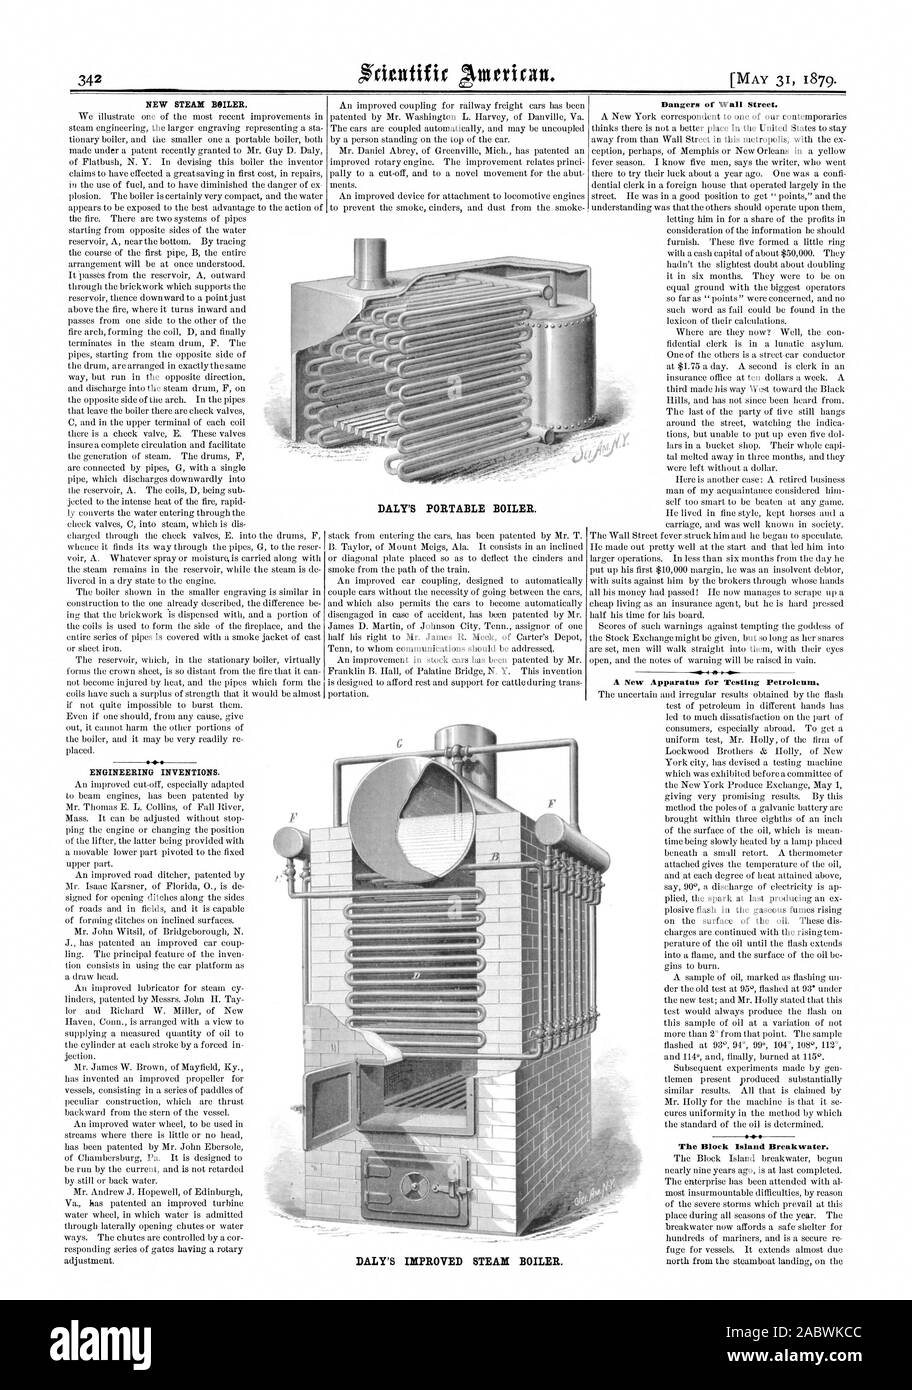 NEW STEAM BOILER. ENGINEERING INVENTIONS. Bangers of Wall Street. A New Apparatus for Testing Petroleum. The Block Island Breakwater. DALY'S IMPROVED STEAM BOILER. DALY'S PORTABLE BOILER., scientific american, 1879-05-31 Stock Photo